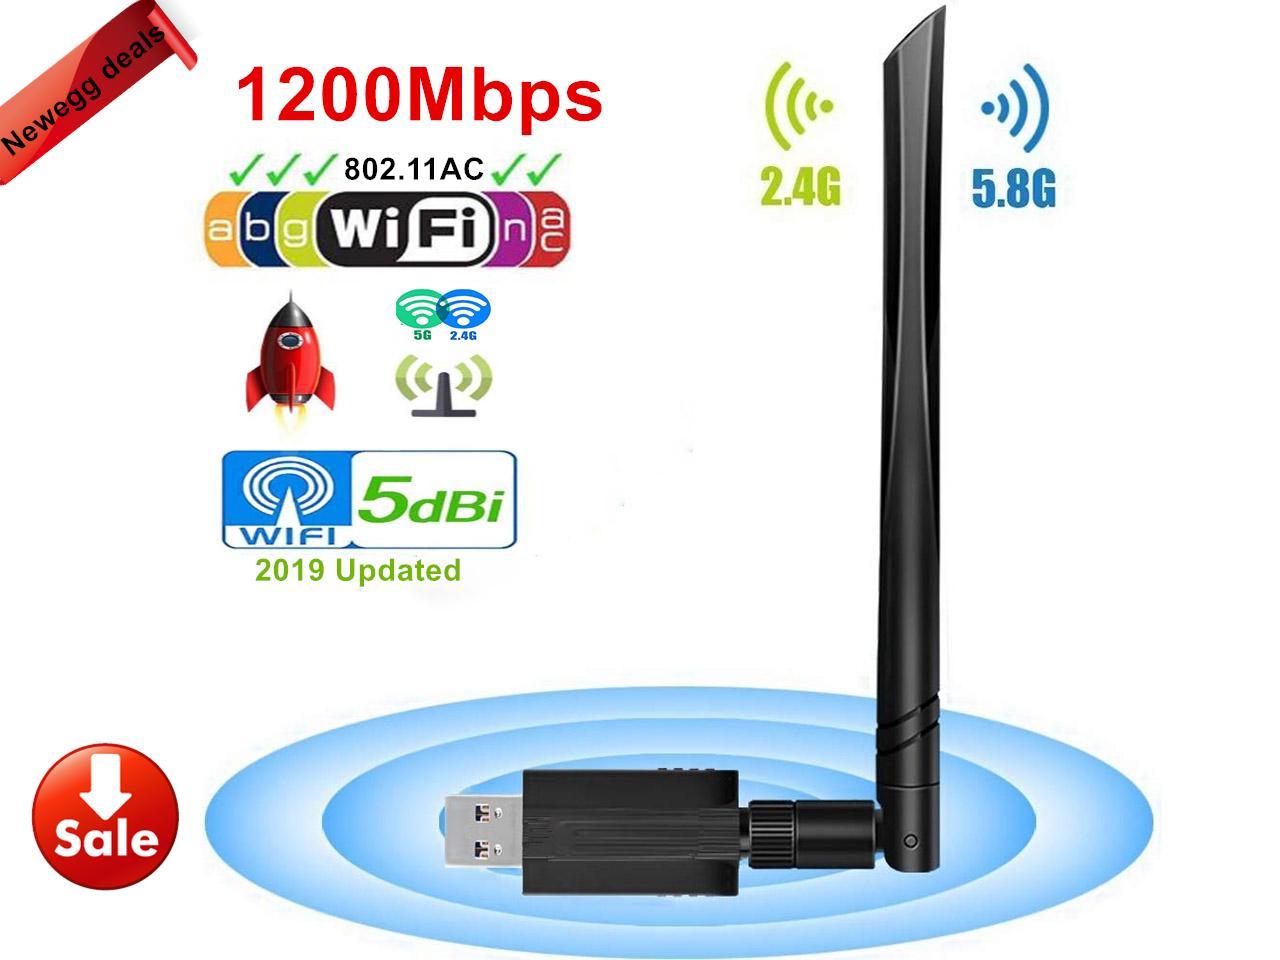 USB WiFi 600Mbps Blueshadow USB WiFi Adapter Dual Band 2.4G/5G Mini Wi-fi ac Wireless Network Card Dongle with High Gain Antenna for Desktop Laptop PC Support Windows XP Vista/7/8/8.1/10 